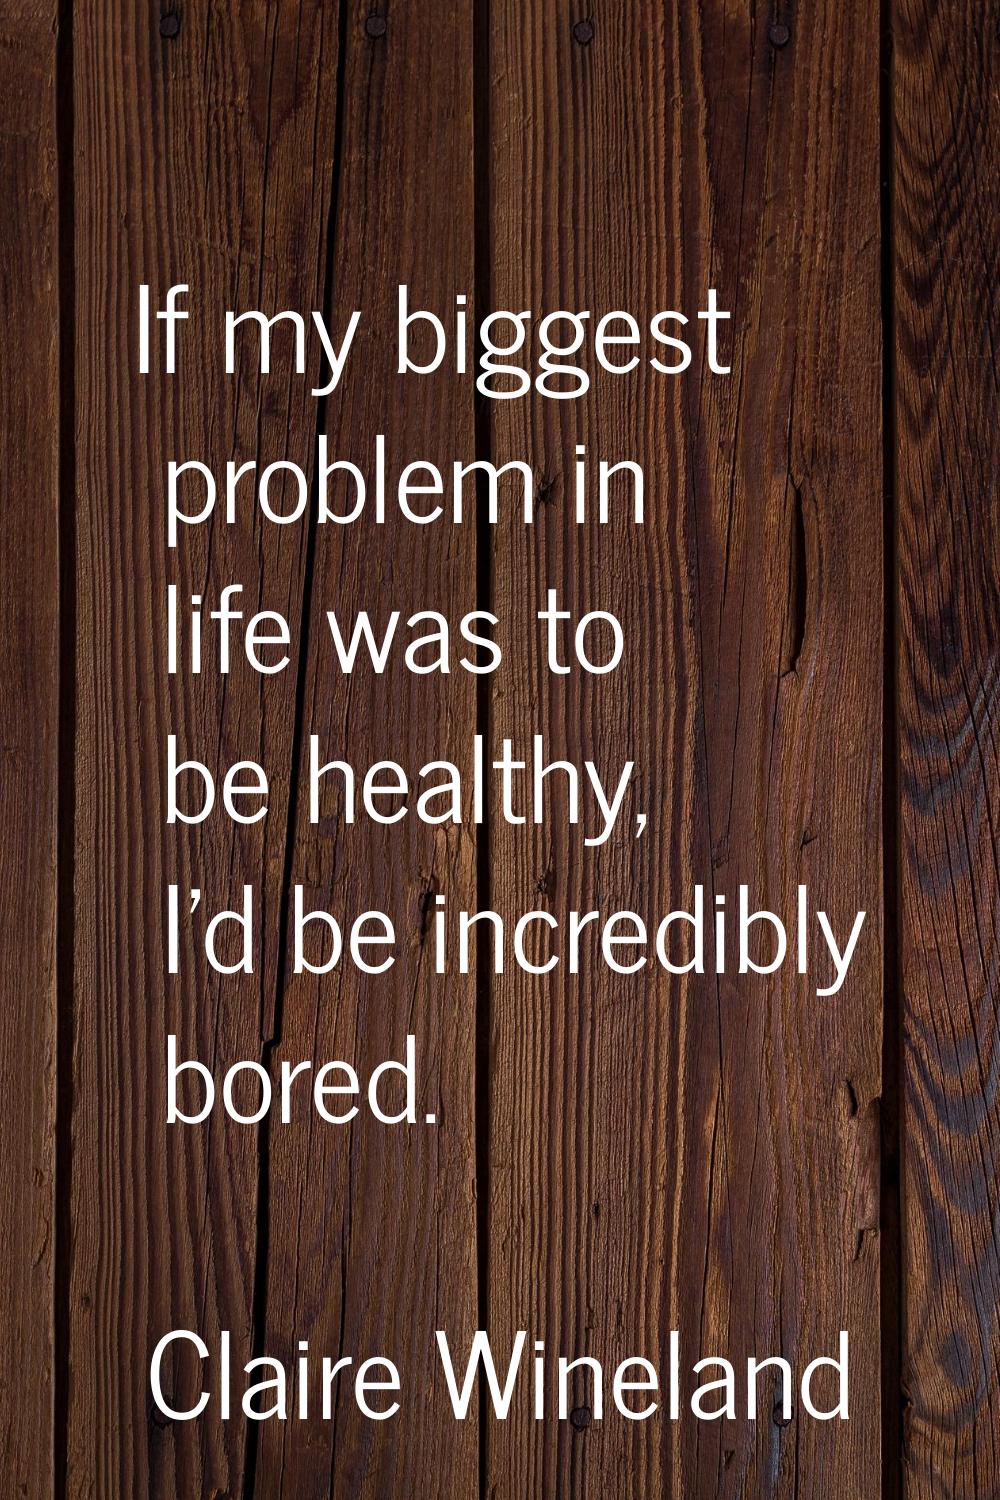 If my biggest problem in life was to be healthy, I'd be incredibly bored.